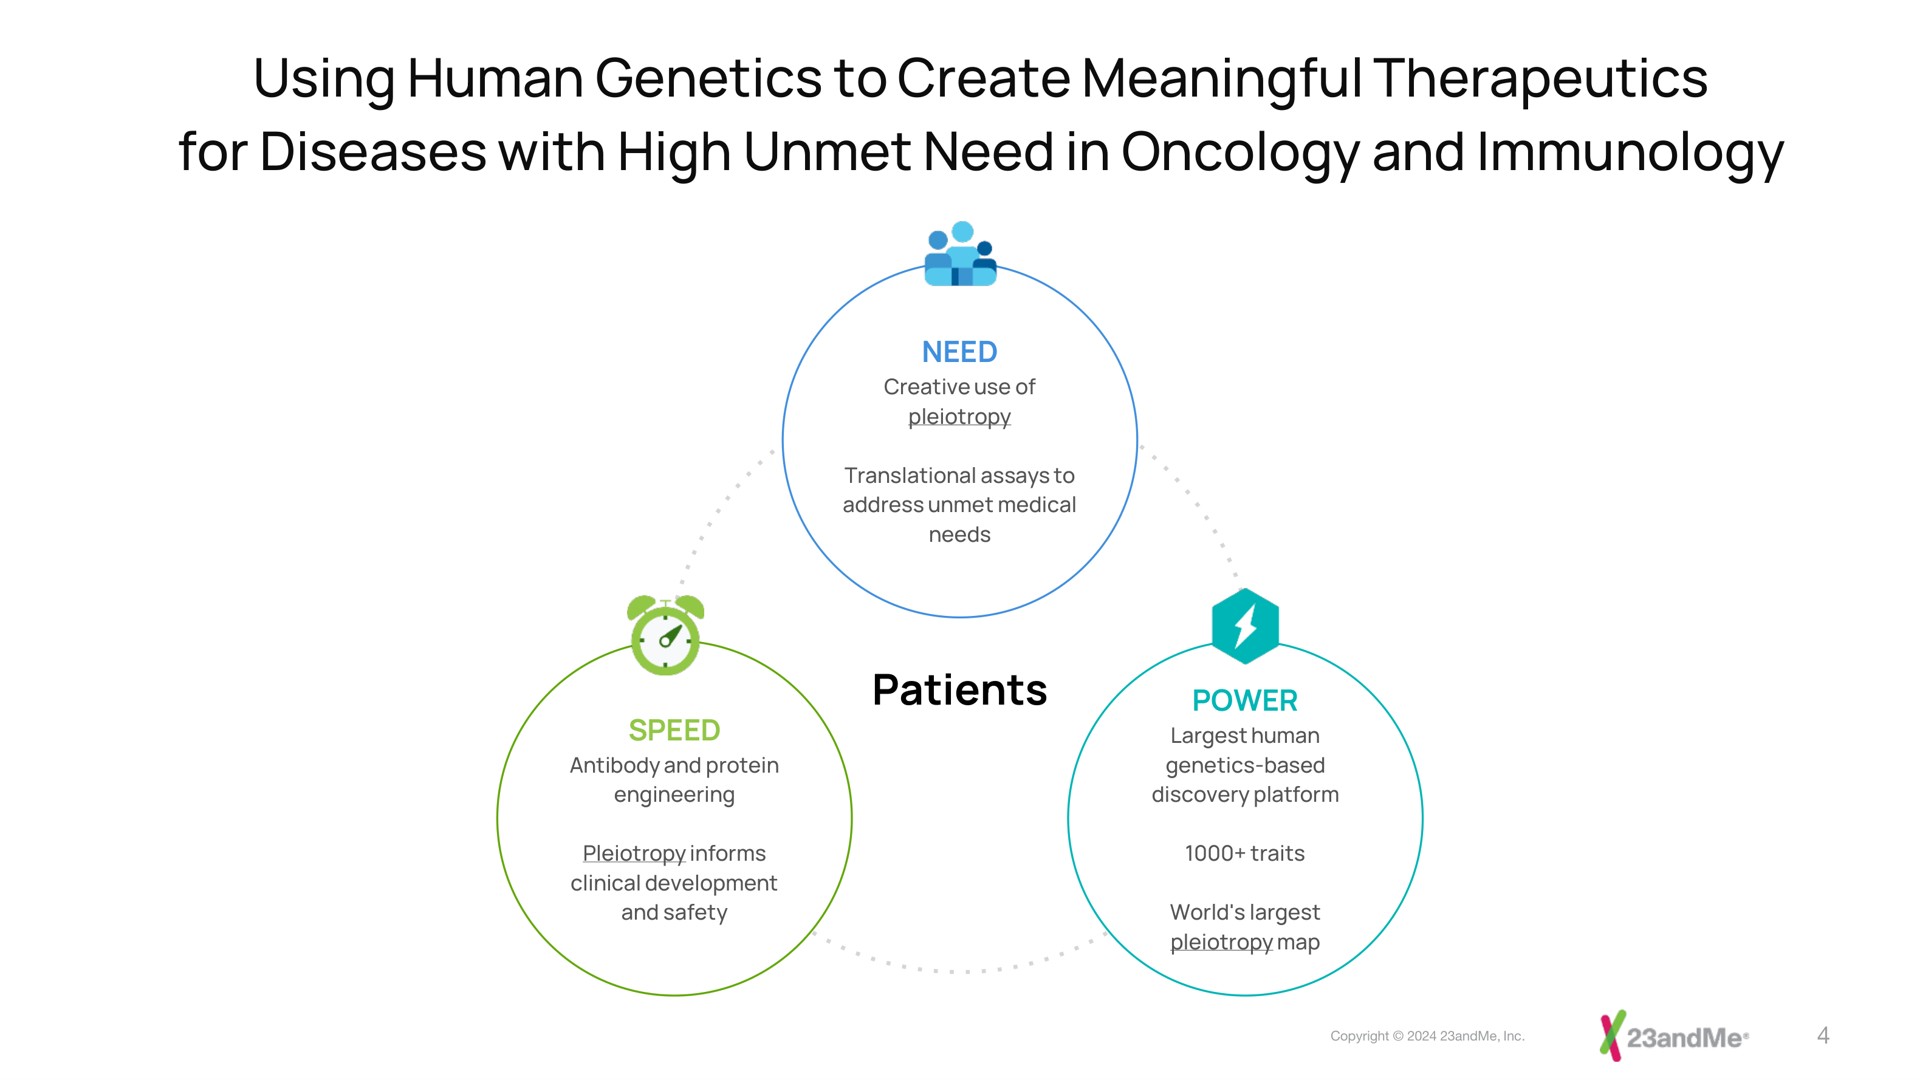 using human genetics to create meaningful therapeutics for diseases with high unmet need in oncology and immunology | 23andMe